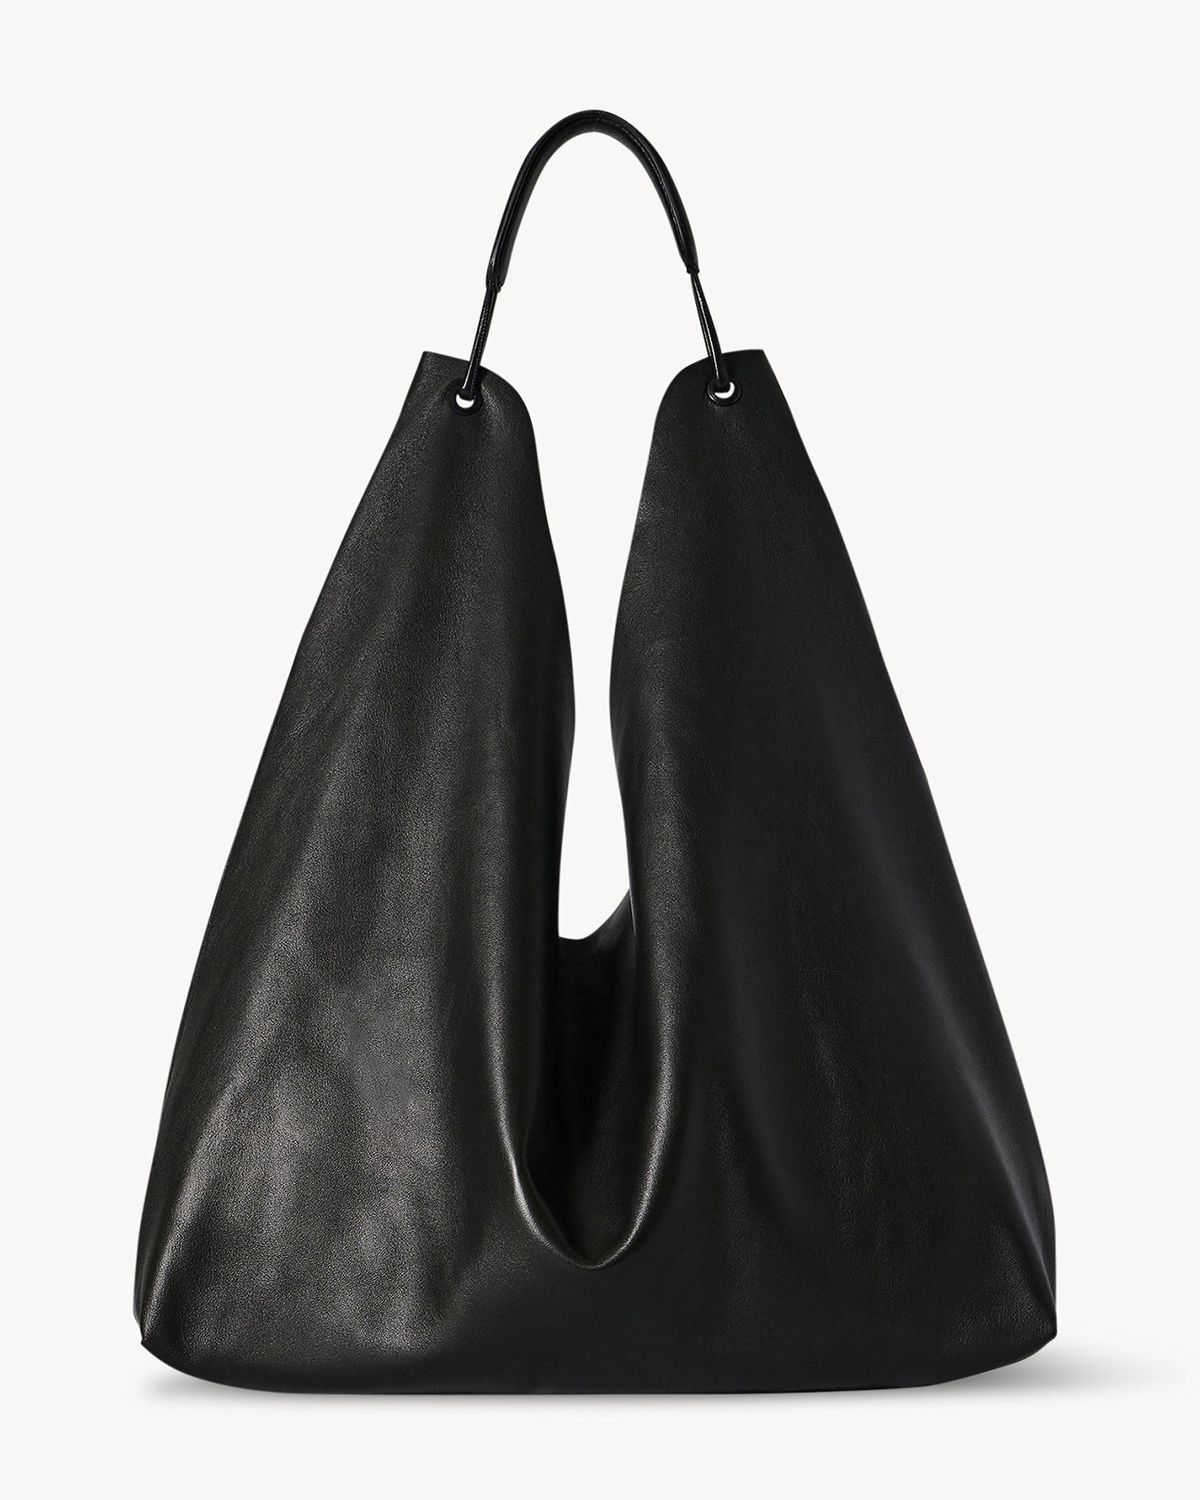 Bindle 3 Bag in Leather